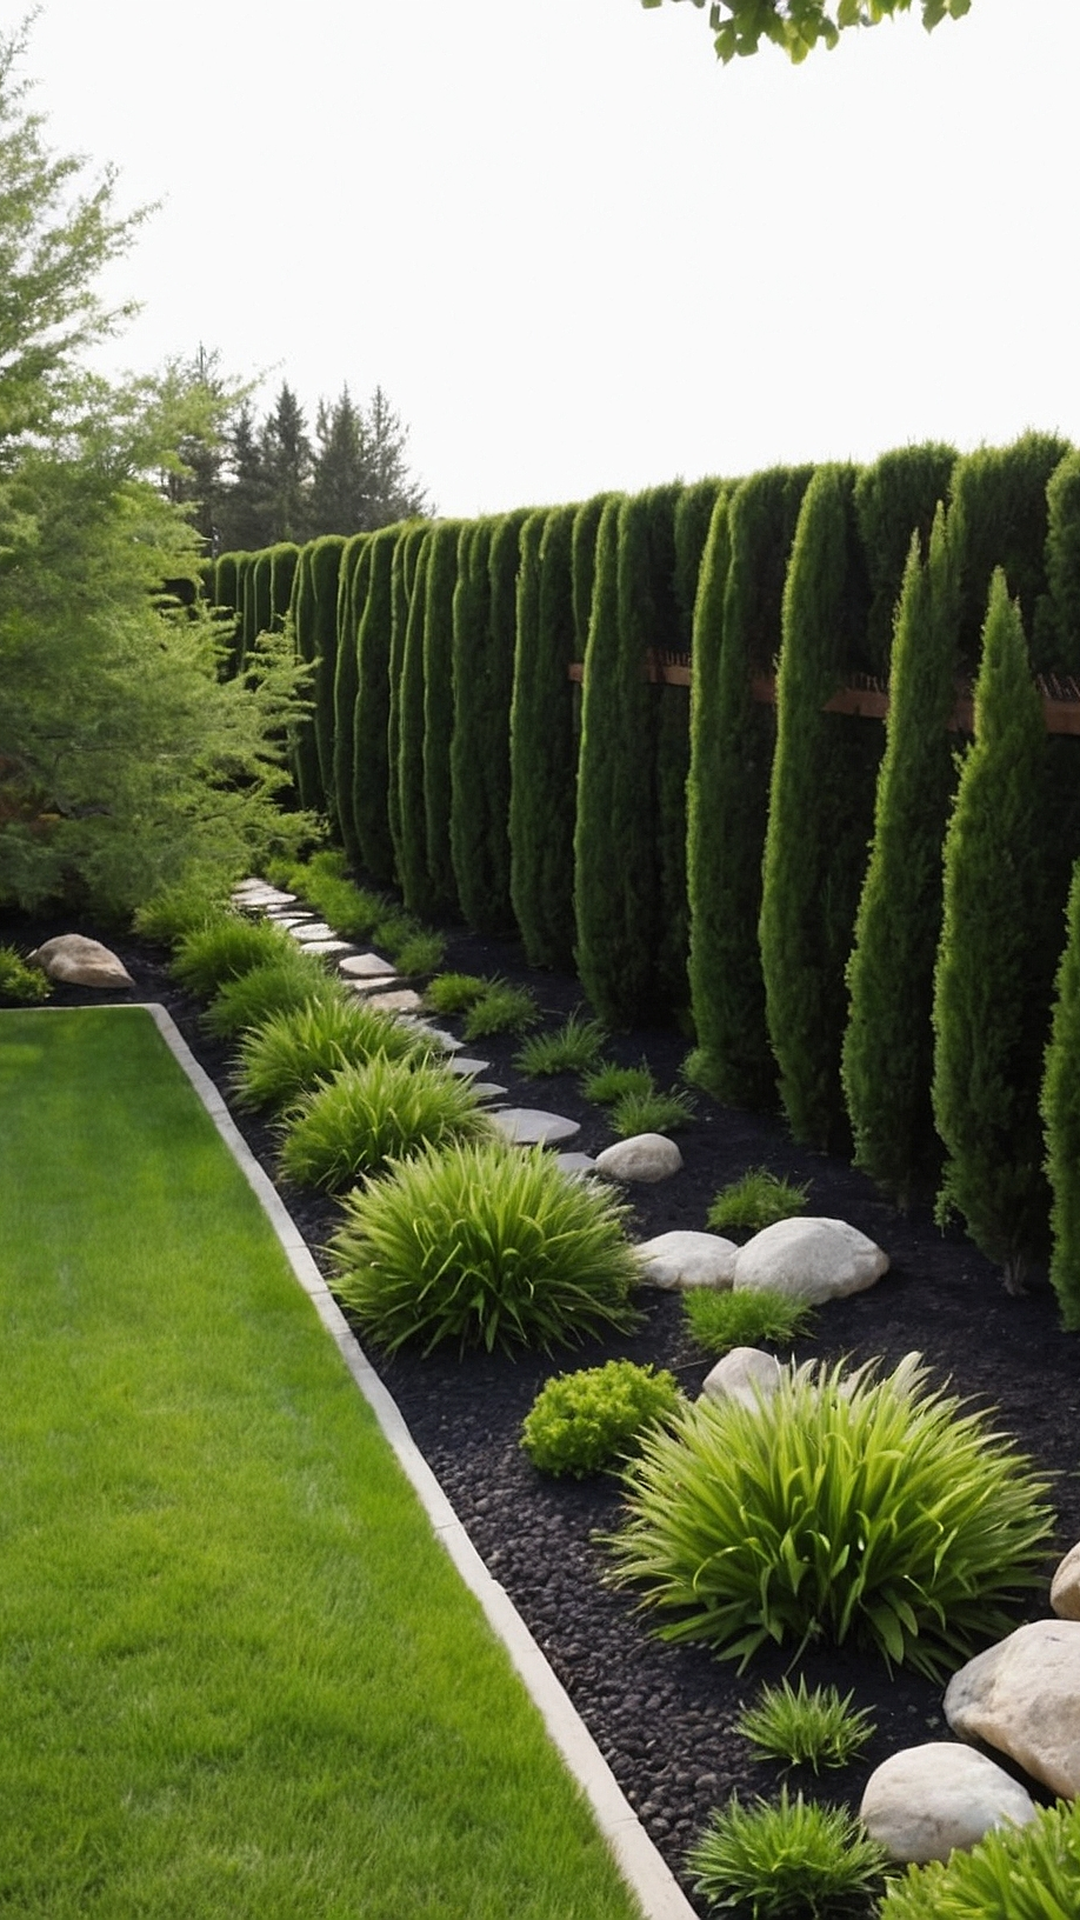 Gate-to-Gate Greenery: Fence Line Landscaping Concepts